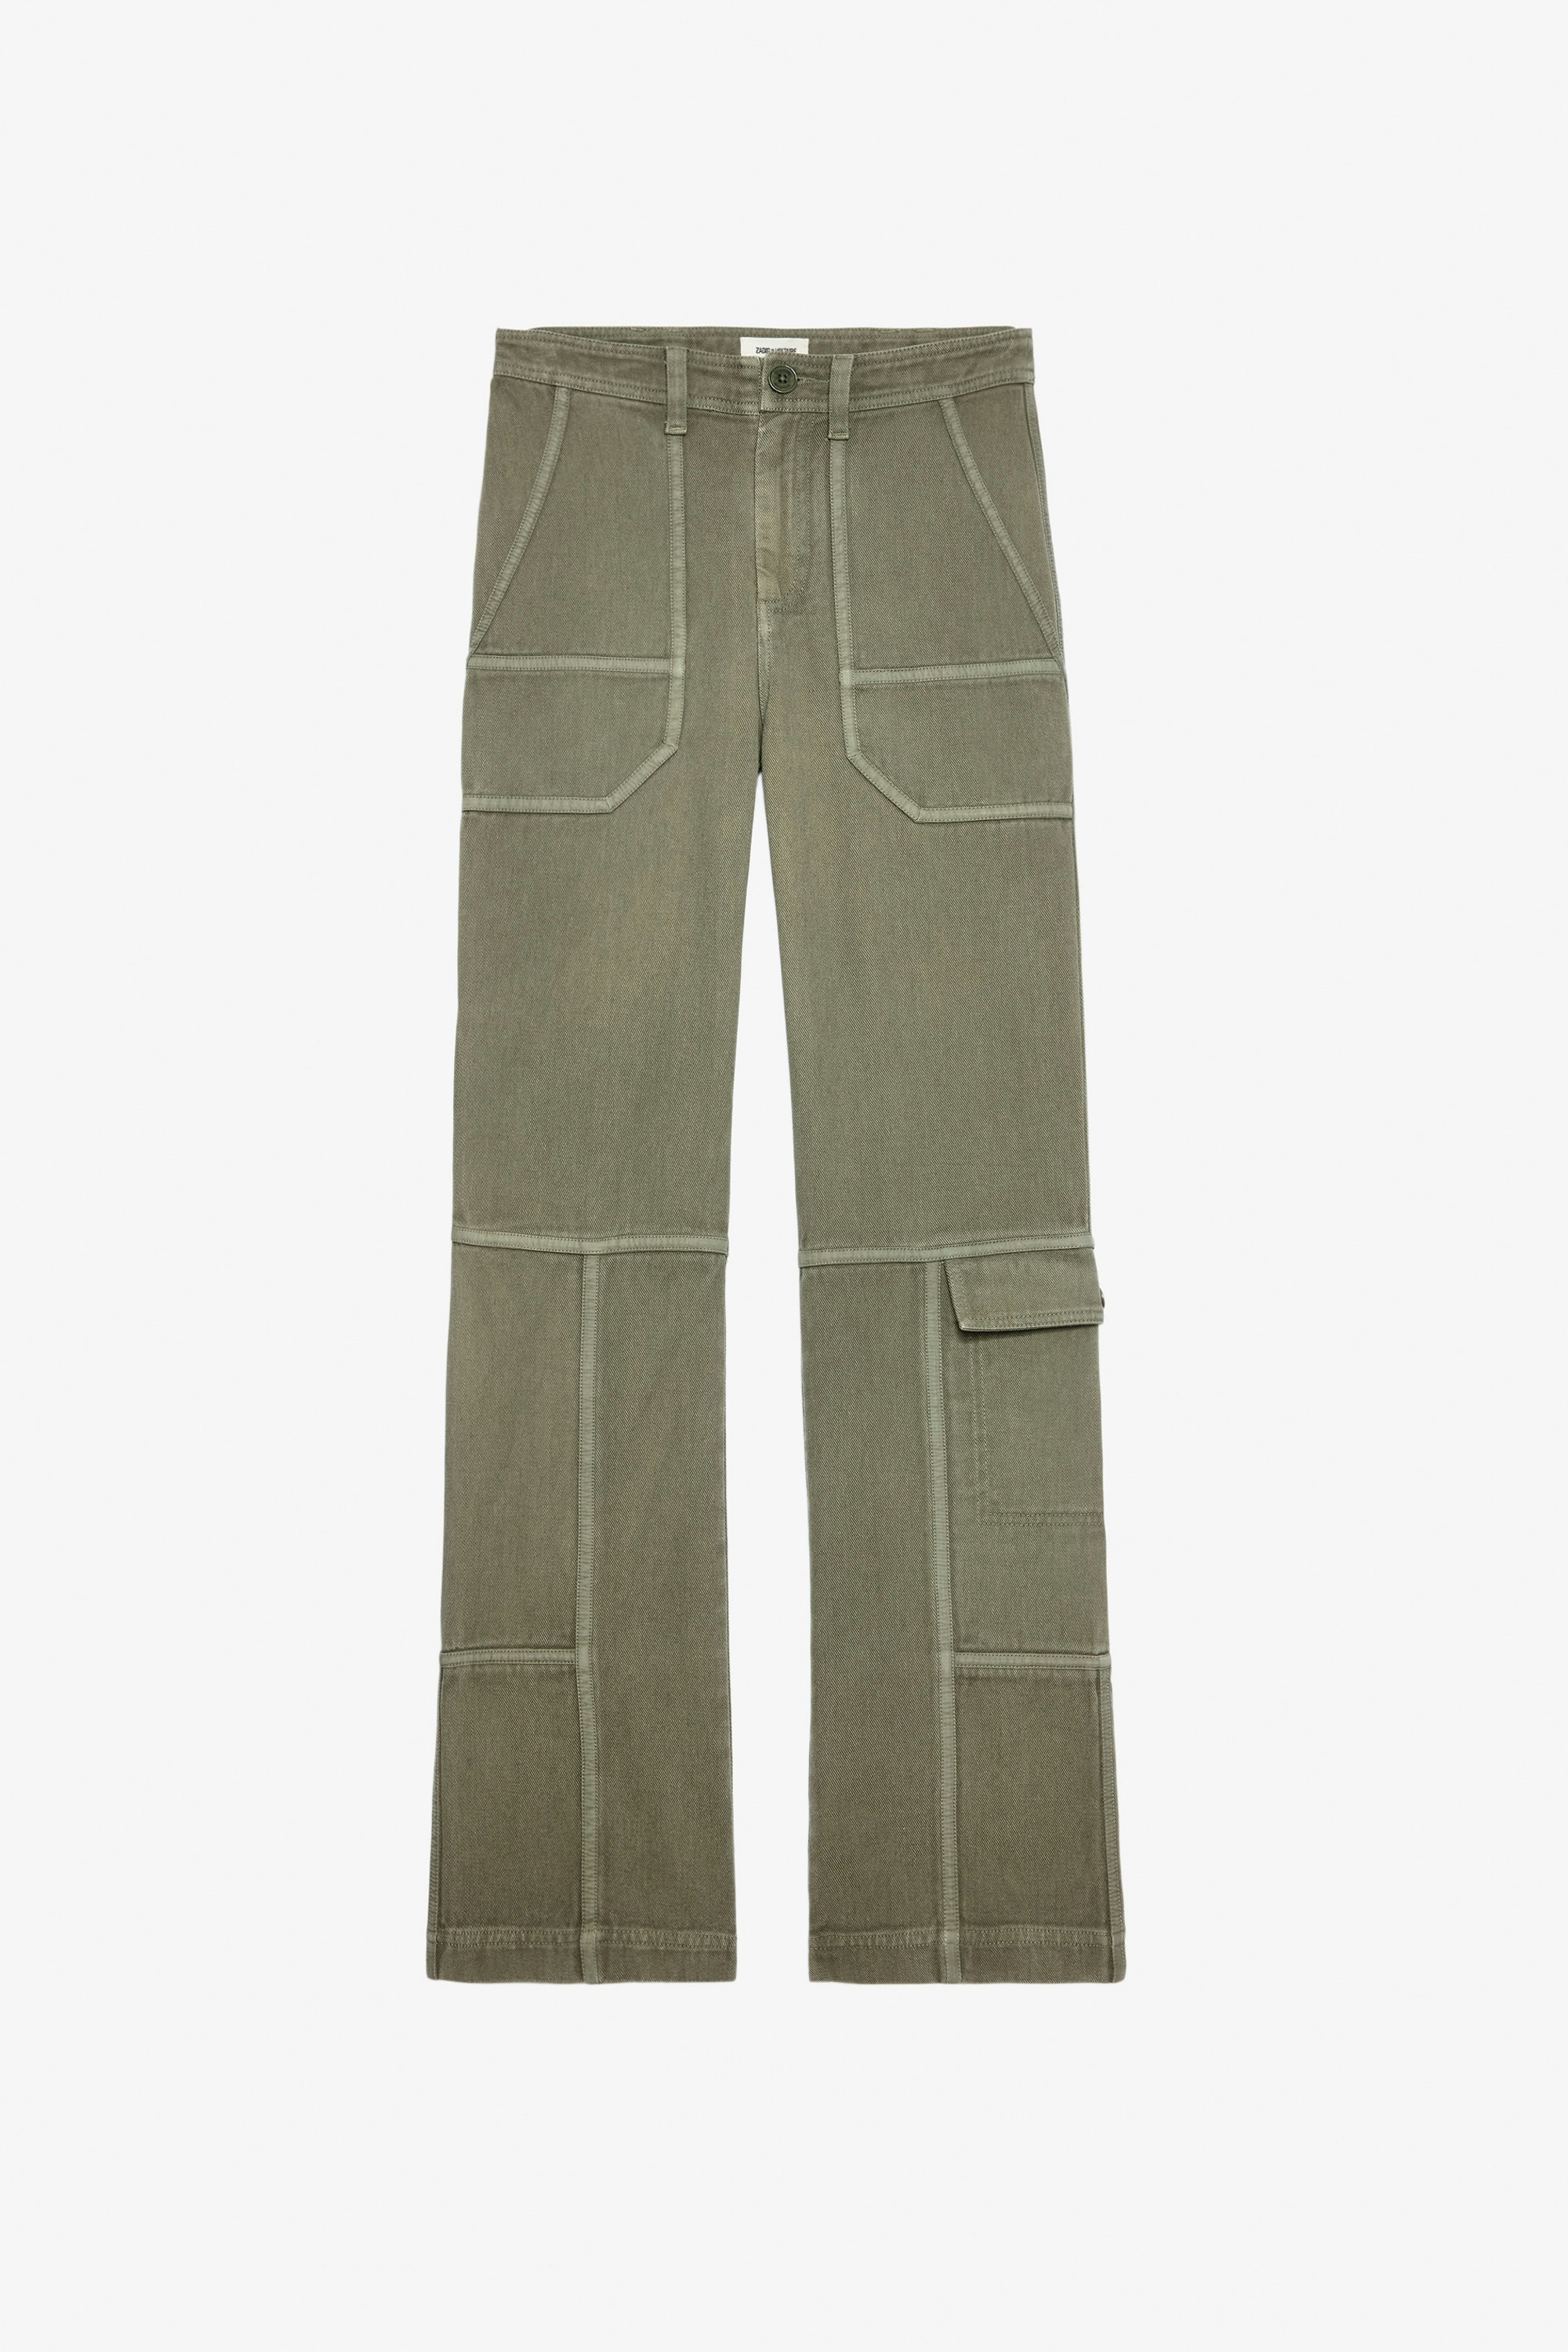 Pepper Trousers - Women’s khaki twill cotton trousers with contrasting details.